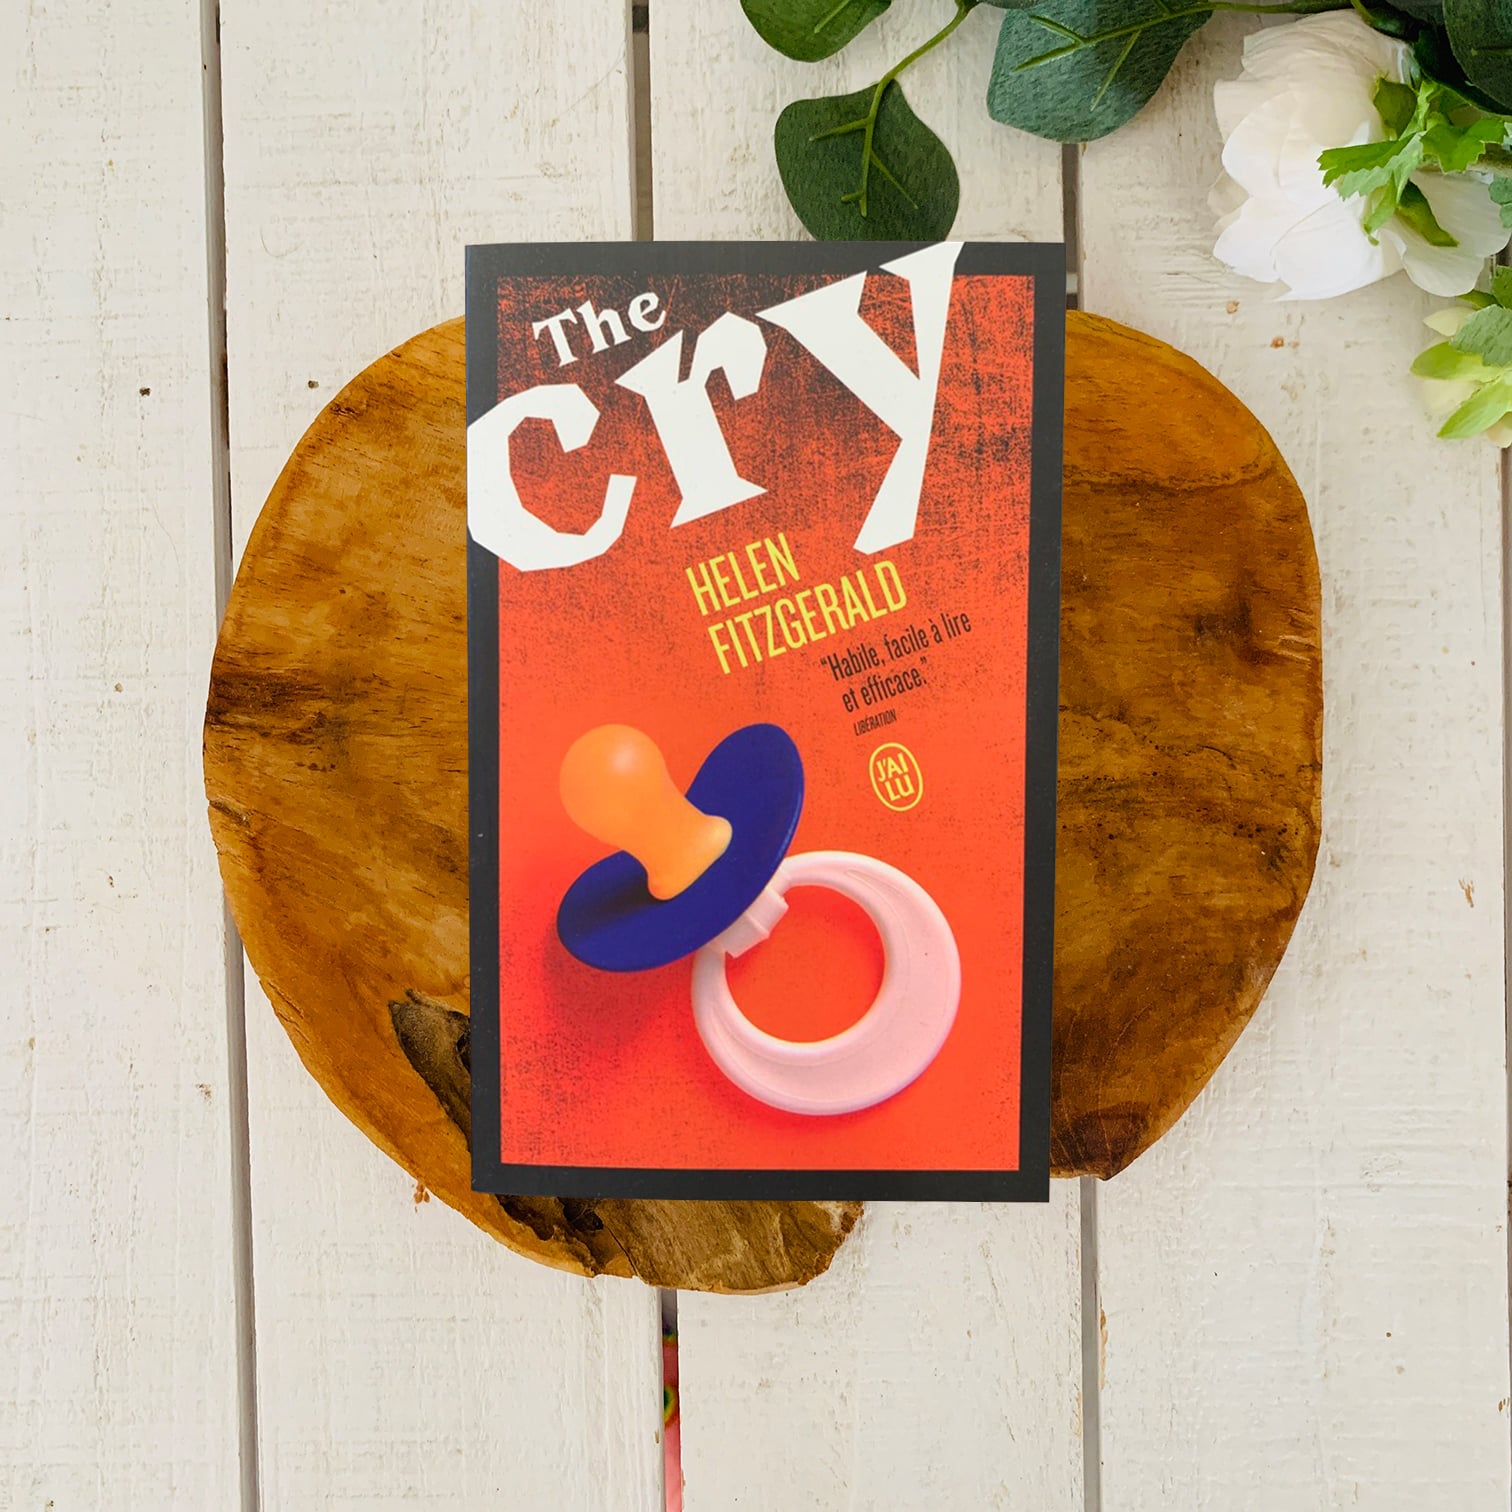 The cry - Helen Fitzgerald